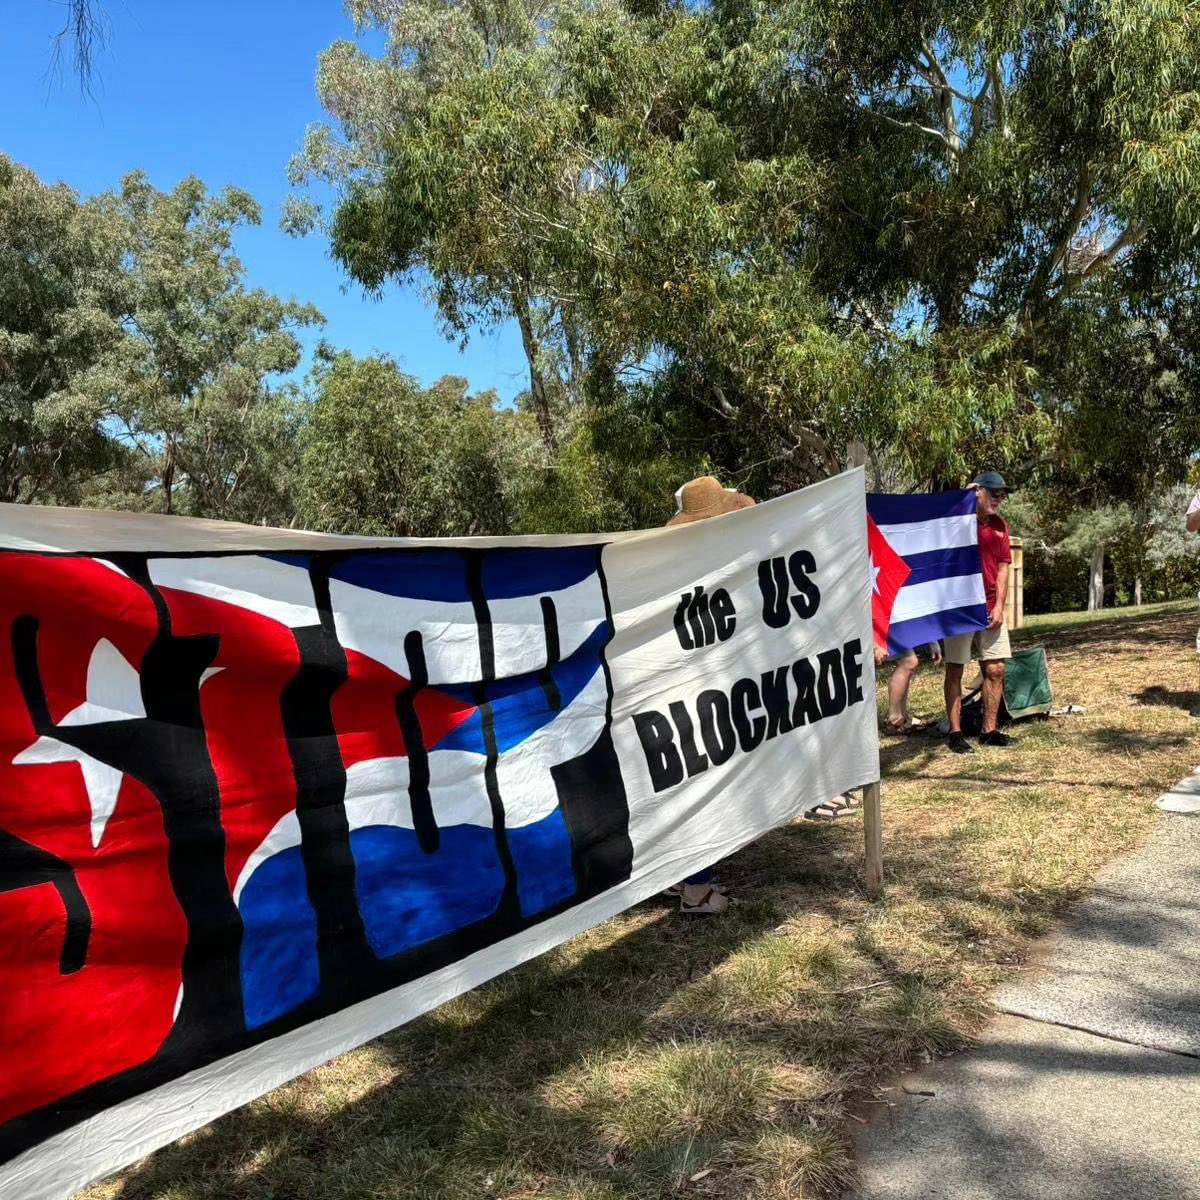 Friends of #Cuba call for an end to the #GenocidalBlockade vs Cuba in #Canberra. Australia
Thank you for all the support and solidarity with the Cuban people.